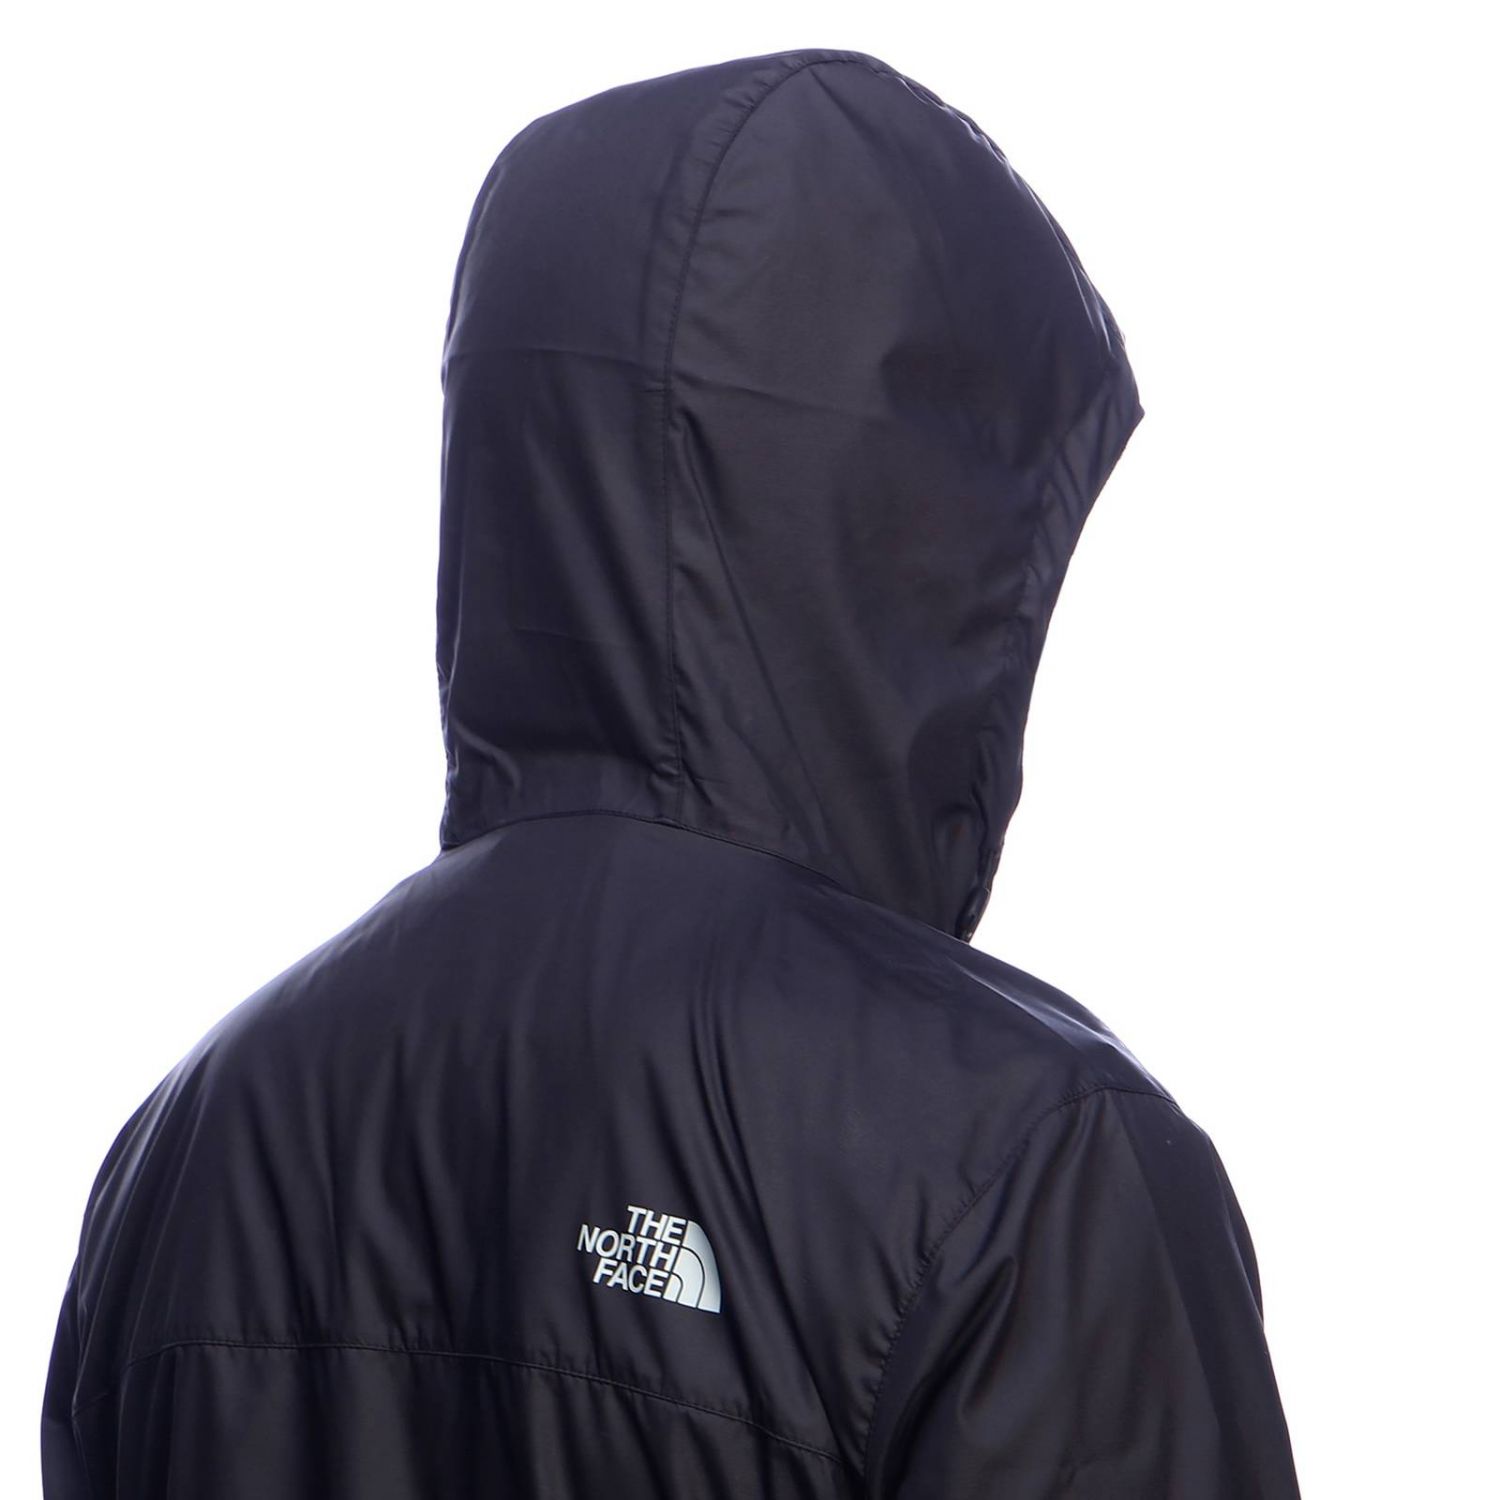 The North Face Outlet: Coat men - Black | Coat The North Face T92VD9 ...